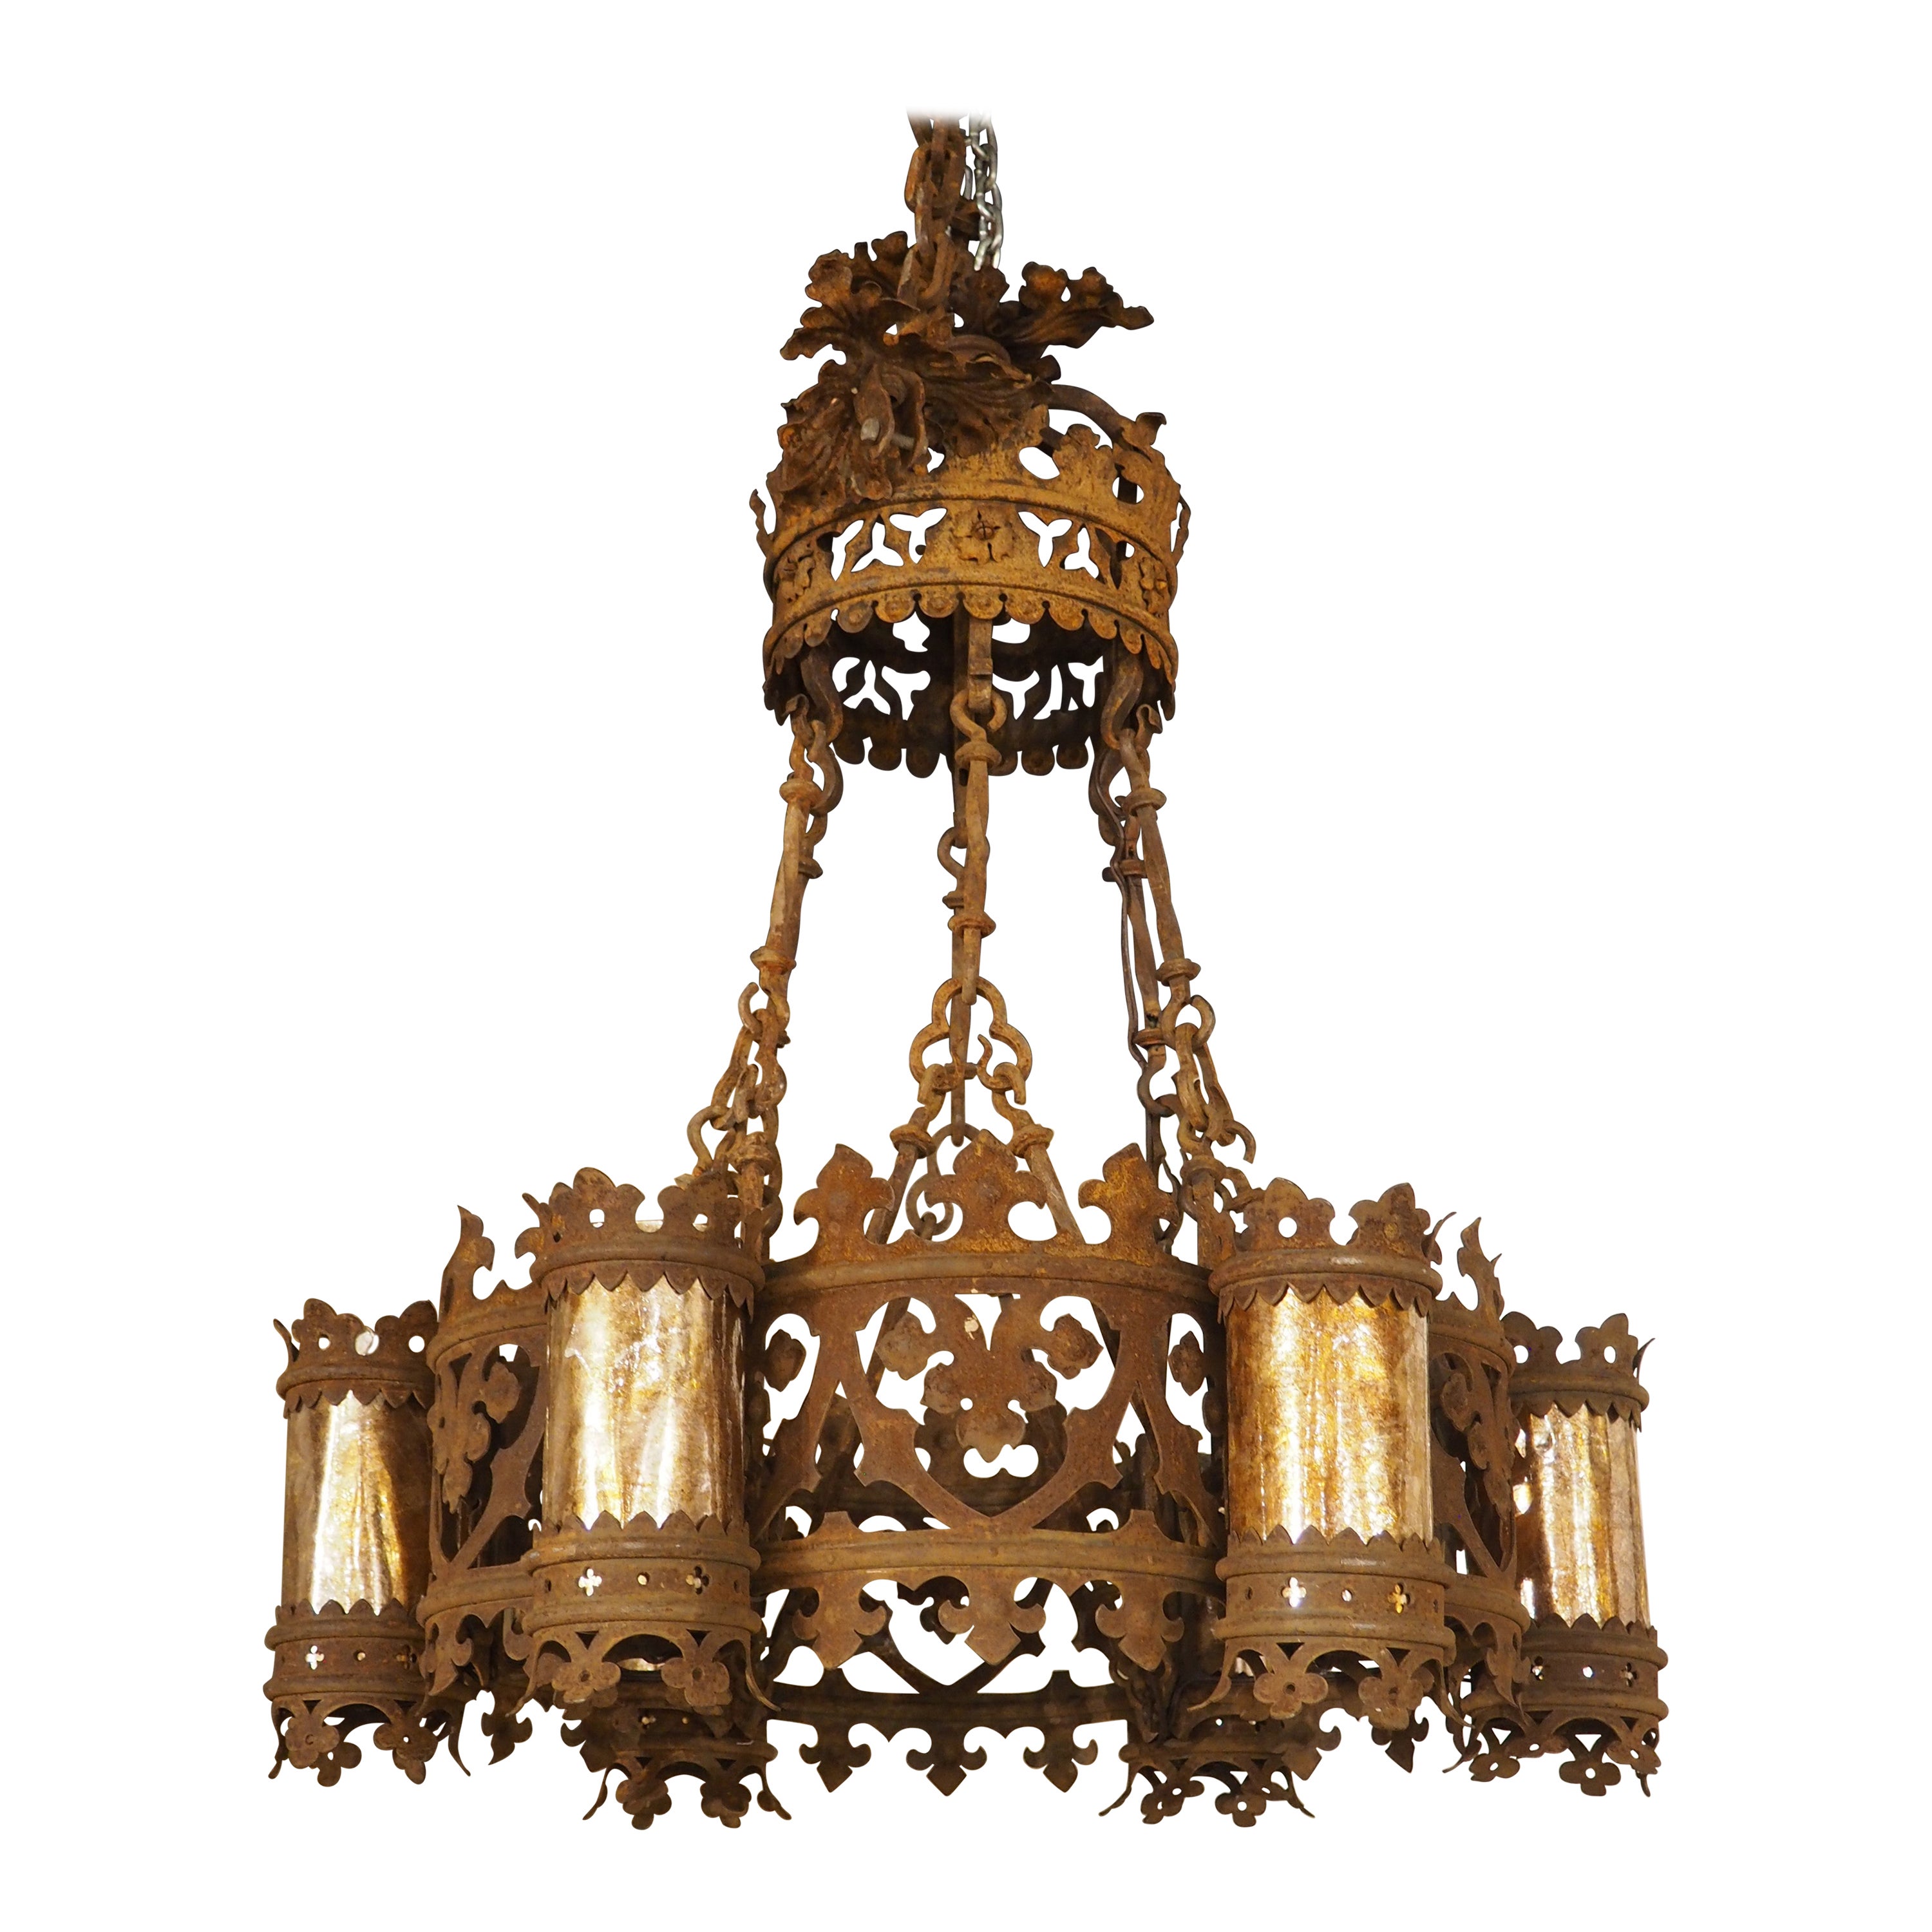 Circa 1900 French Gothic Style Wrought Iron Chandelier For Sale